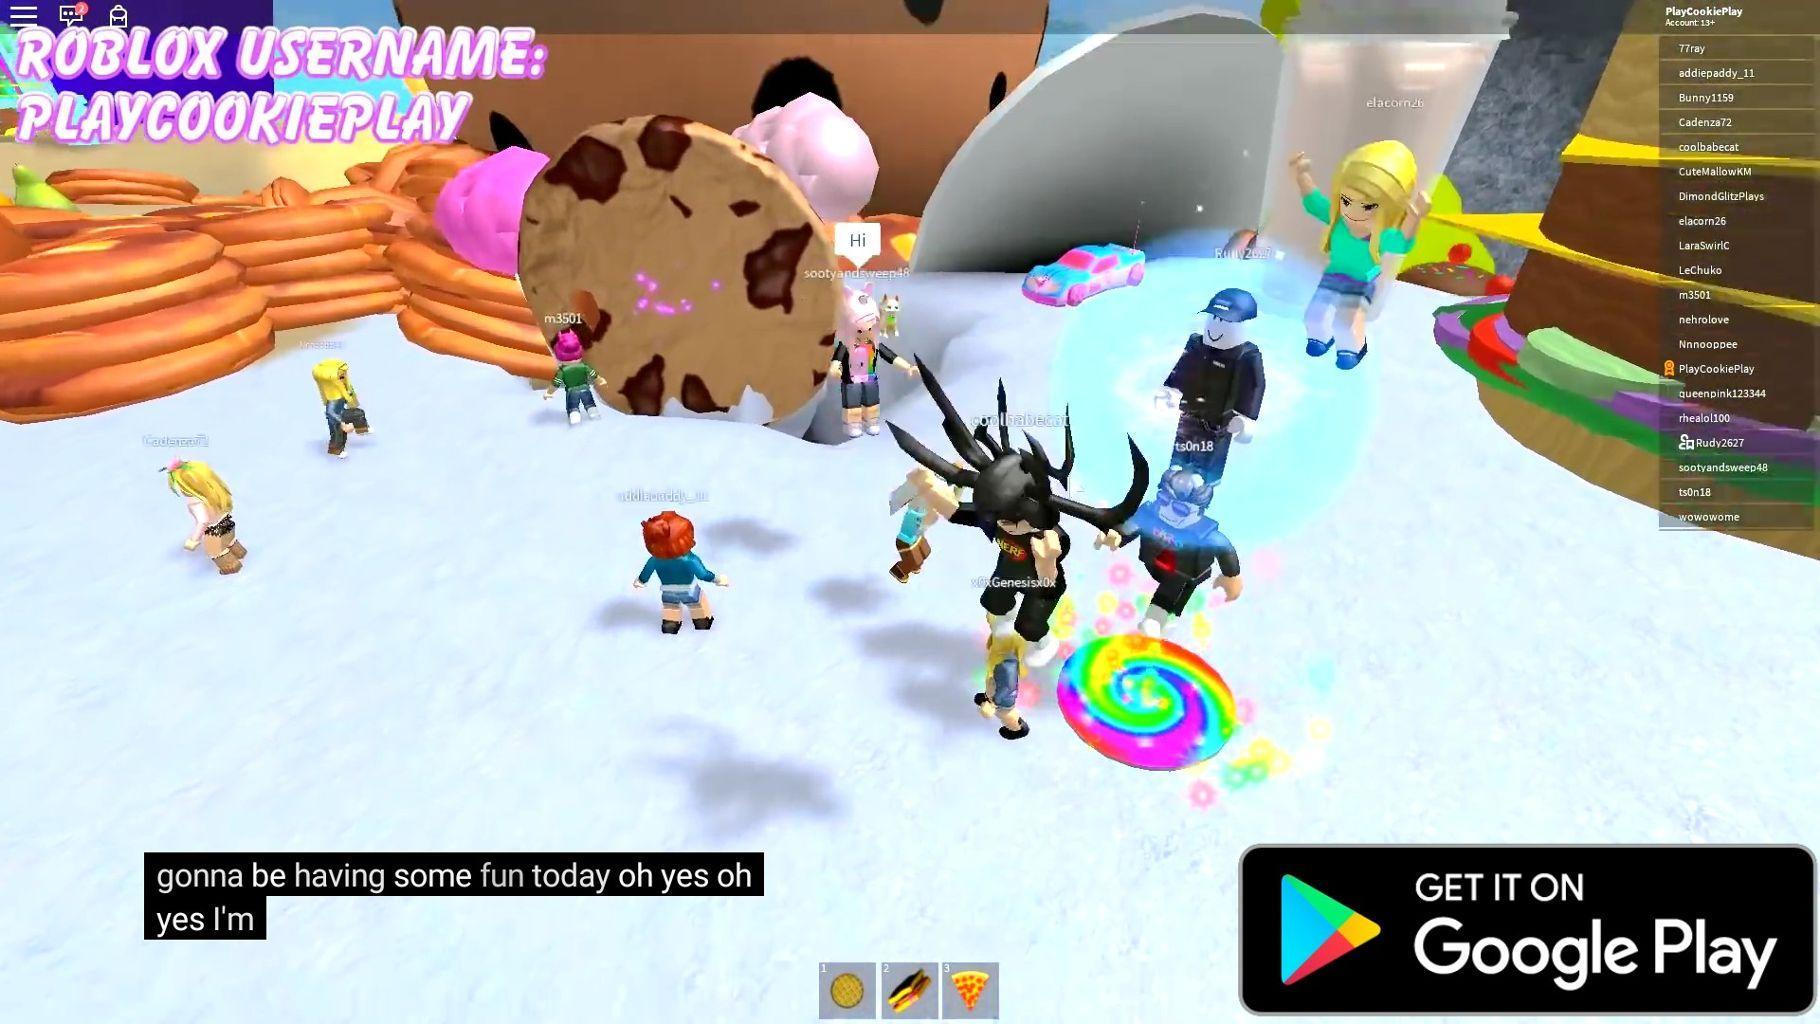 Guide For Cookie Swirl C Roblox For Android Apk Download - download guide for cookie swirl c roblox google play